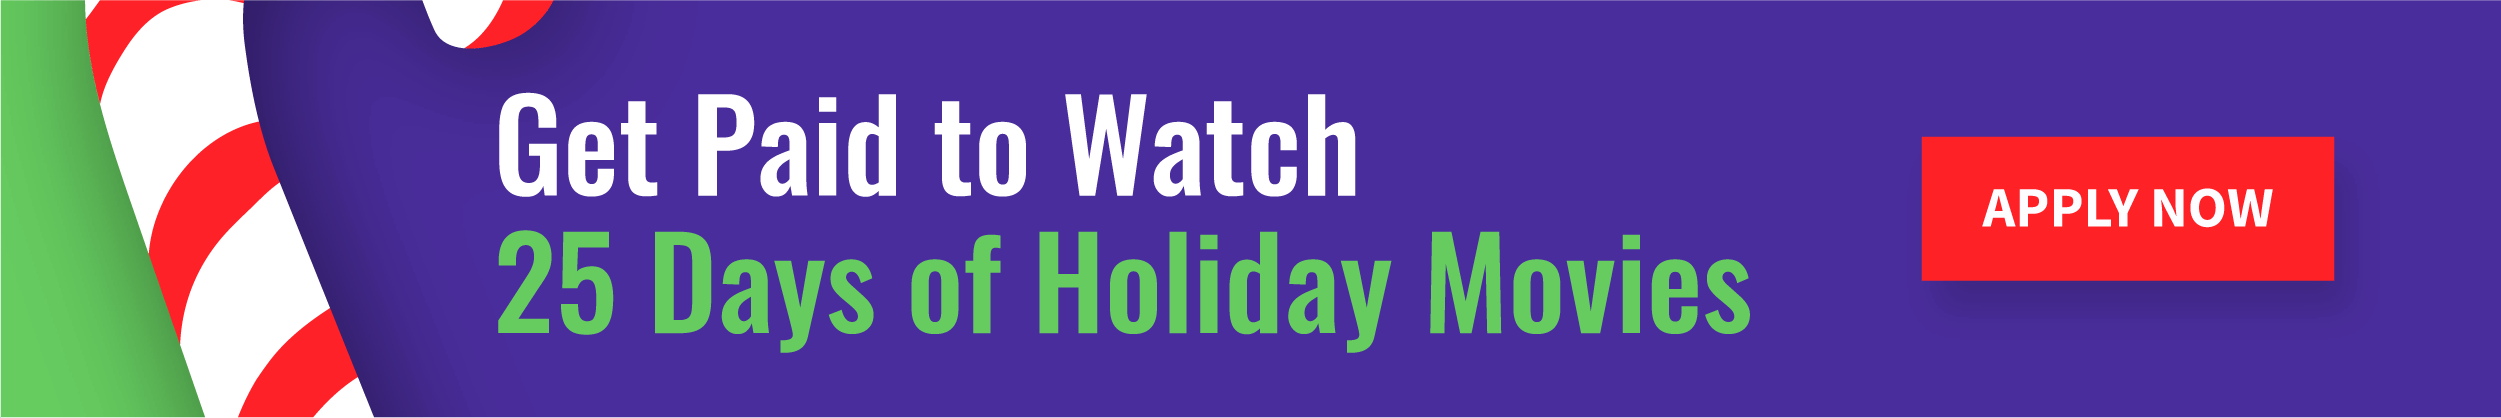 Earn $2,500 by watching 25 holiday movies!